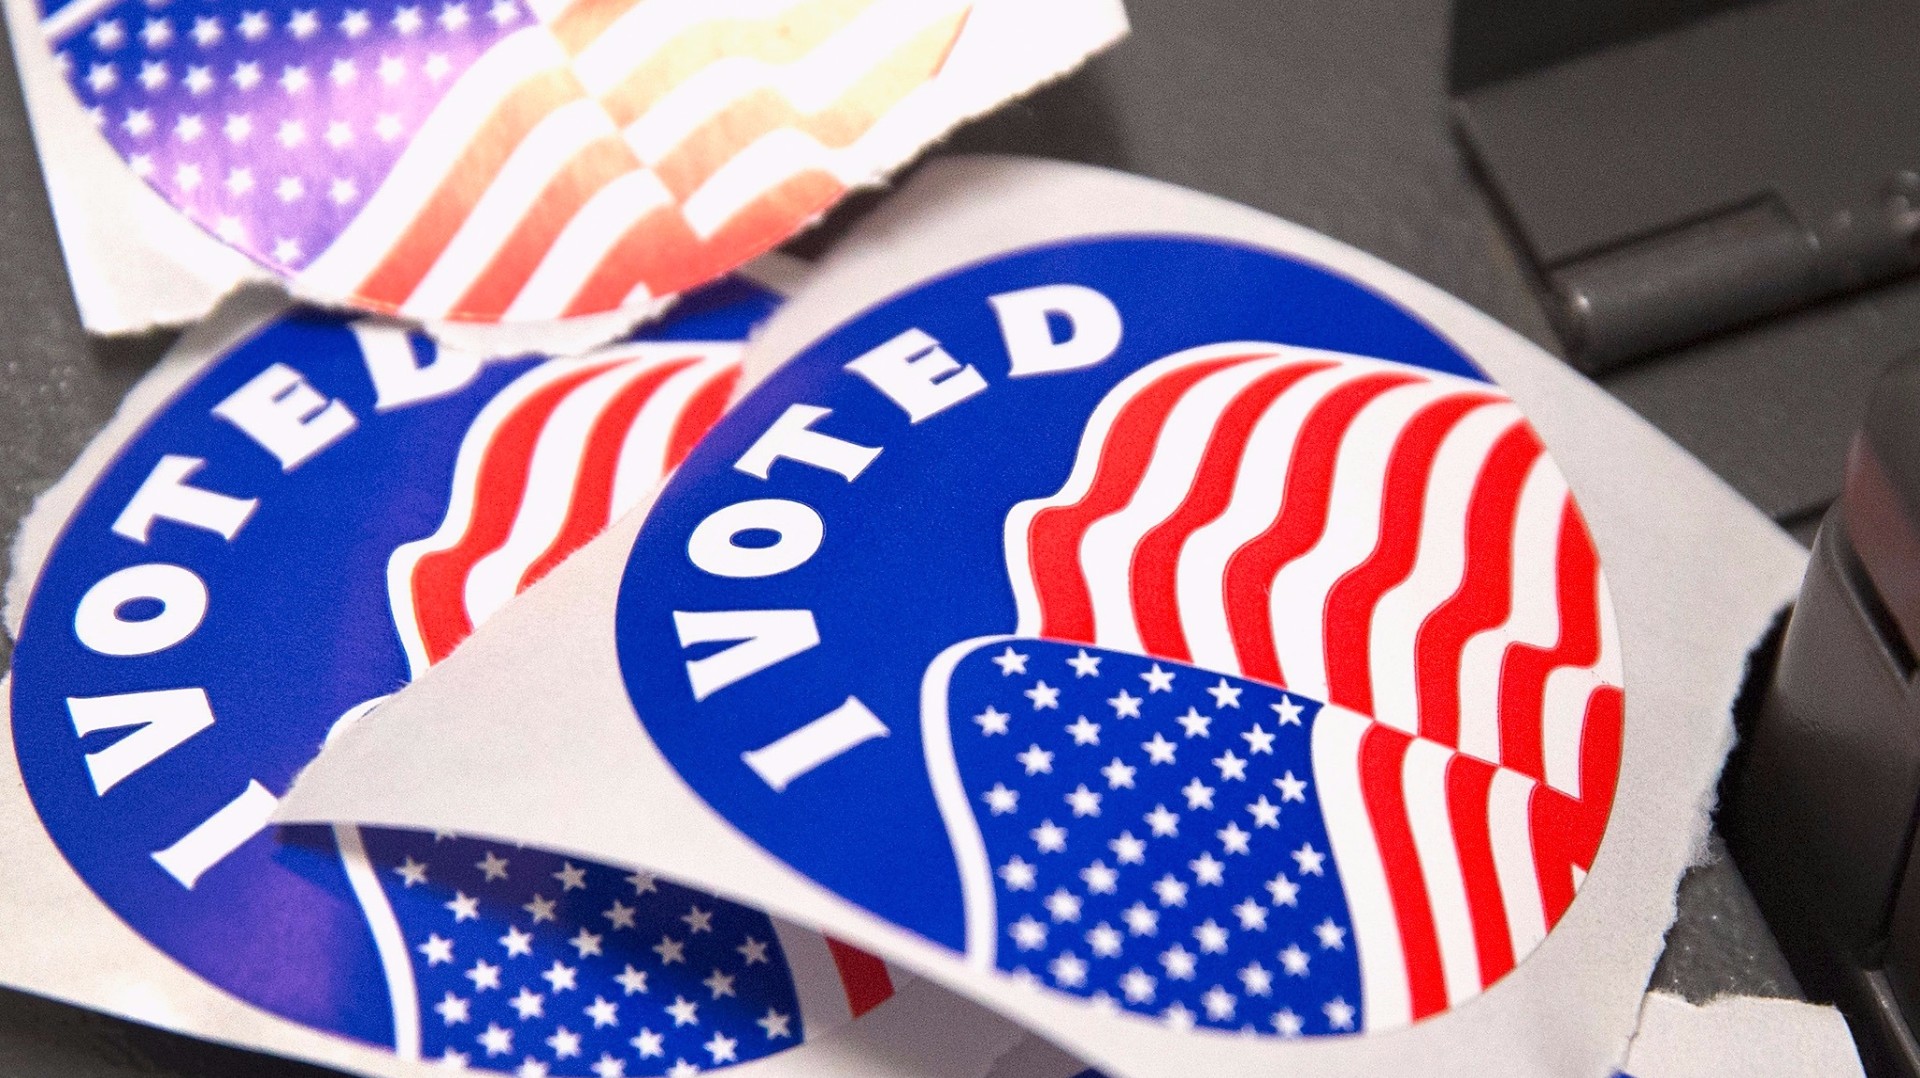 Kentucky primary election: No 'I voted' stickers for Louisville voters